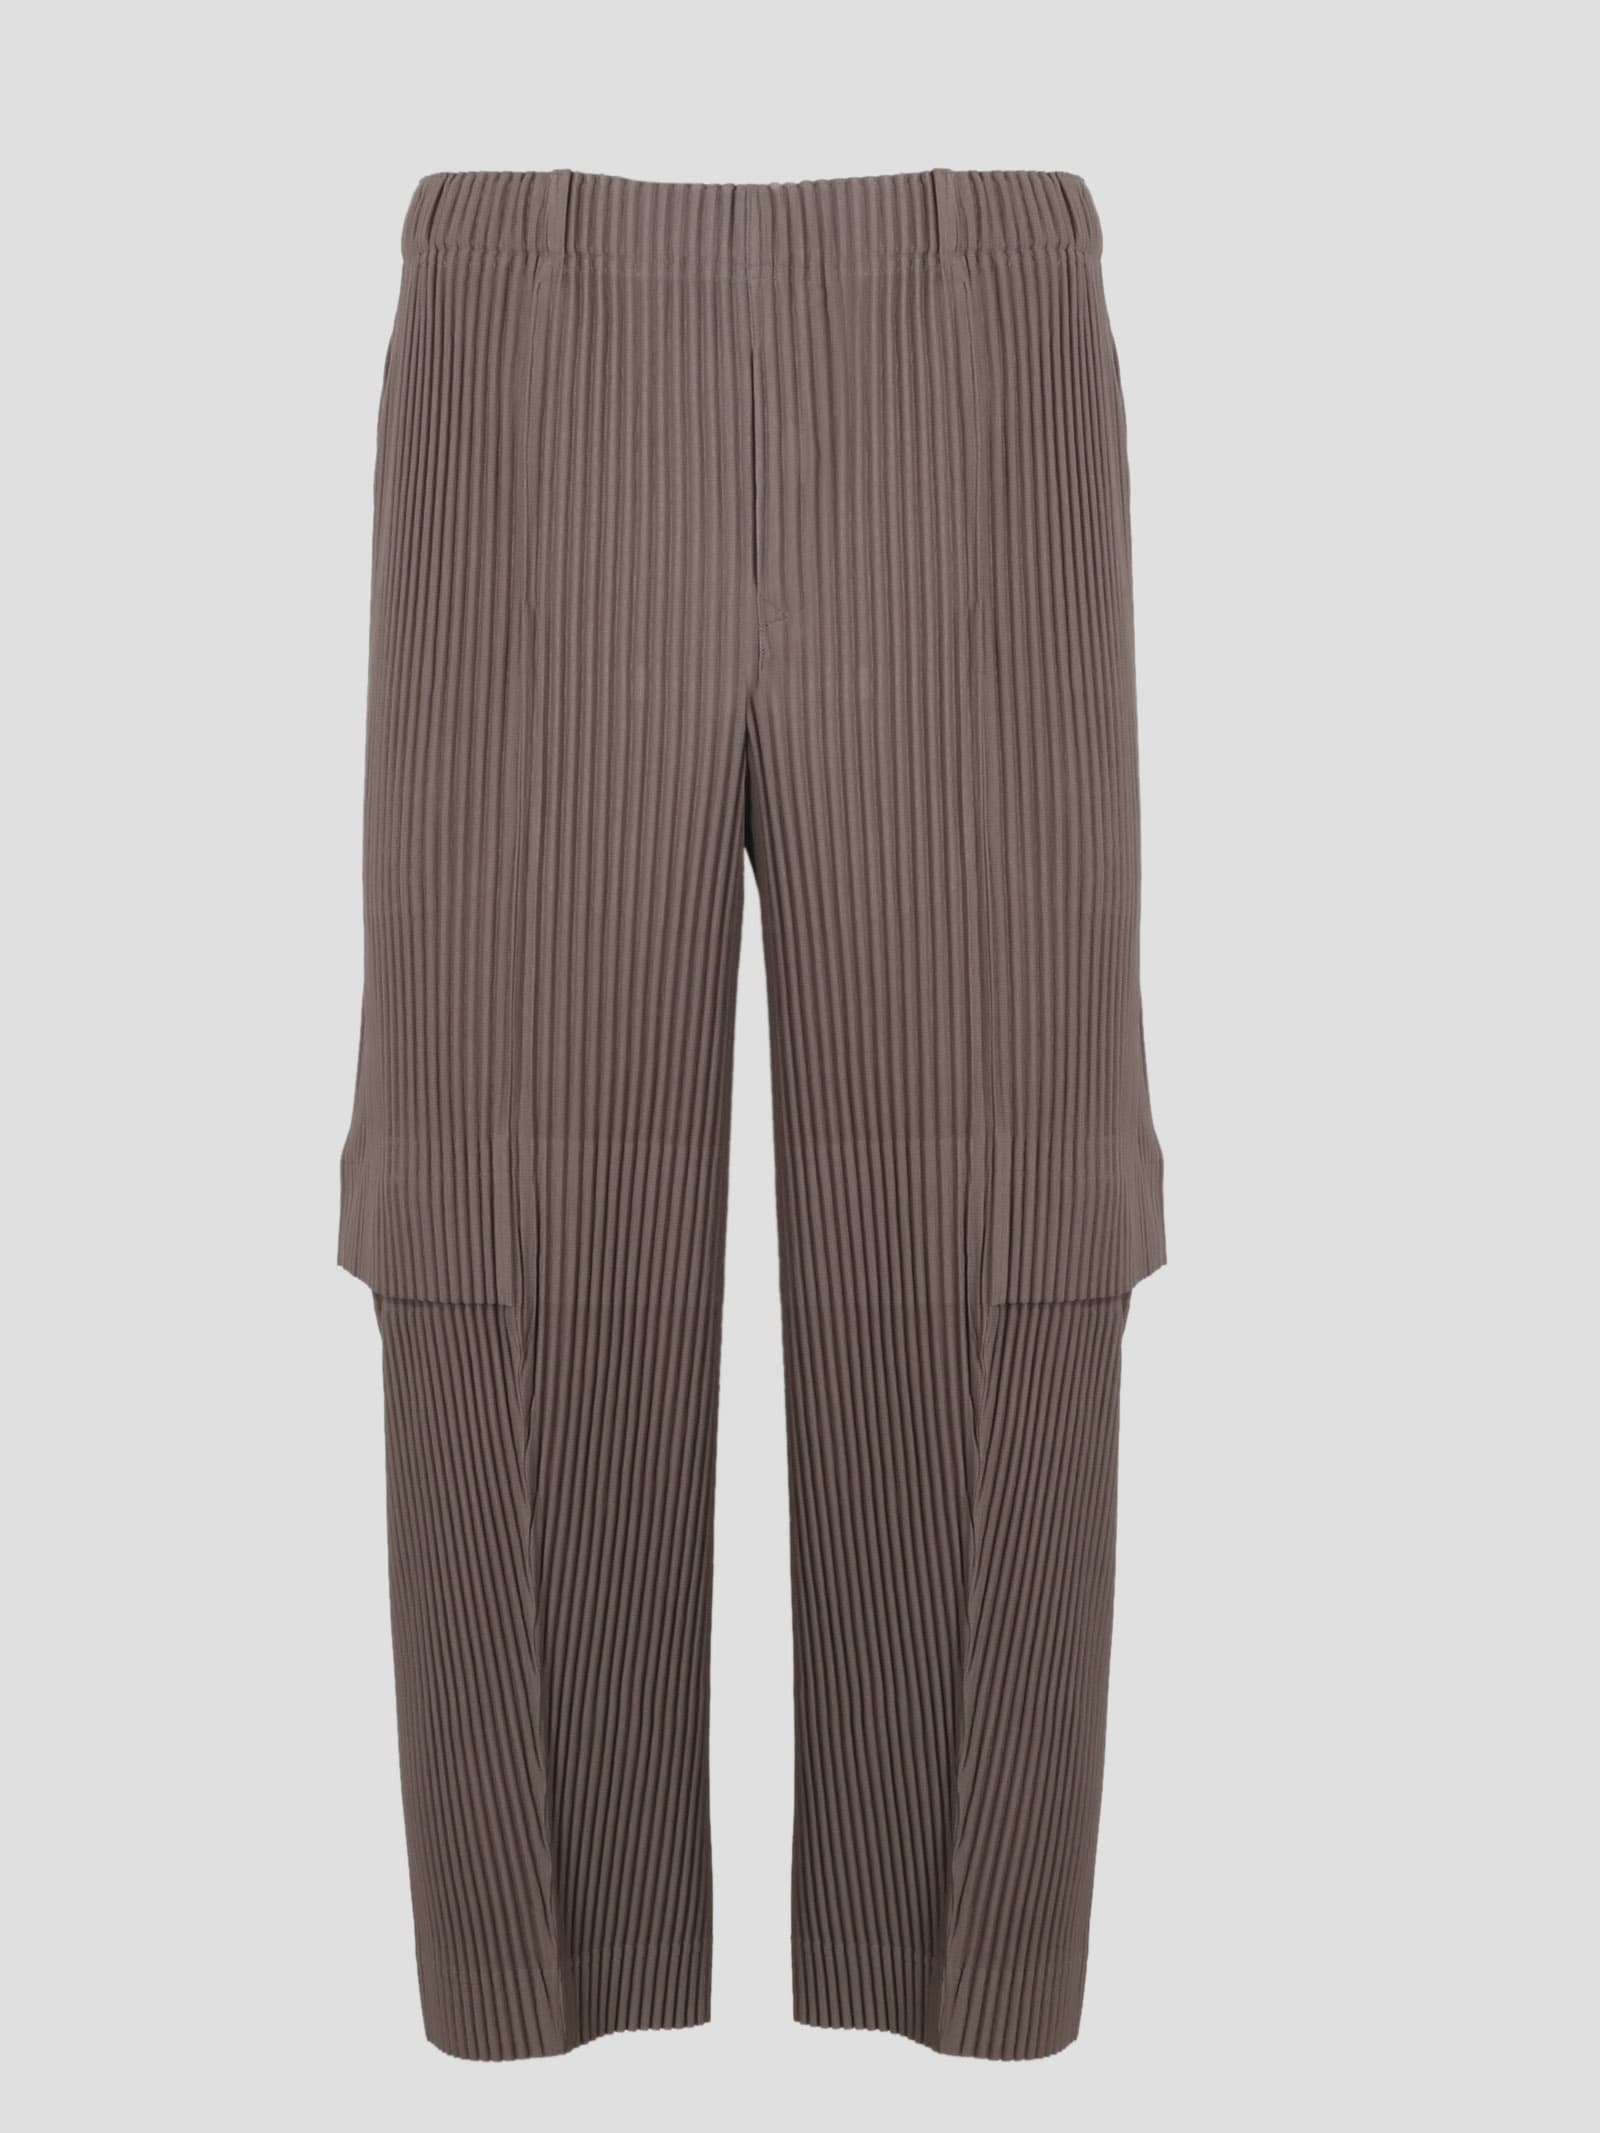 Homme Plissé Issey Miyake Pleated Tapered Pants